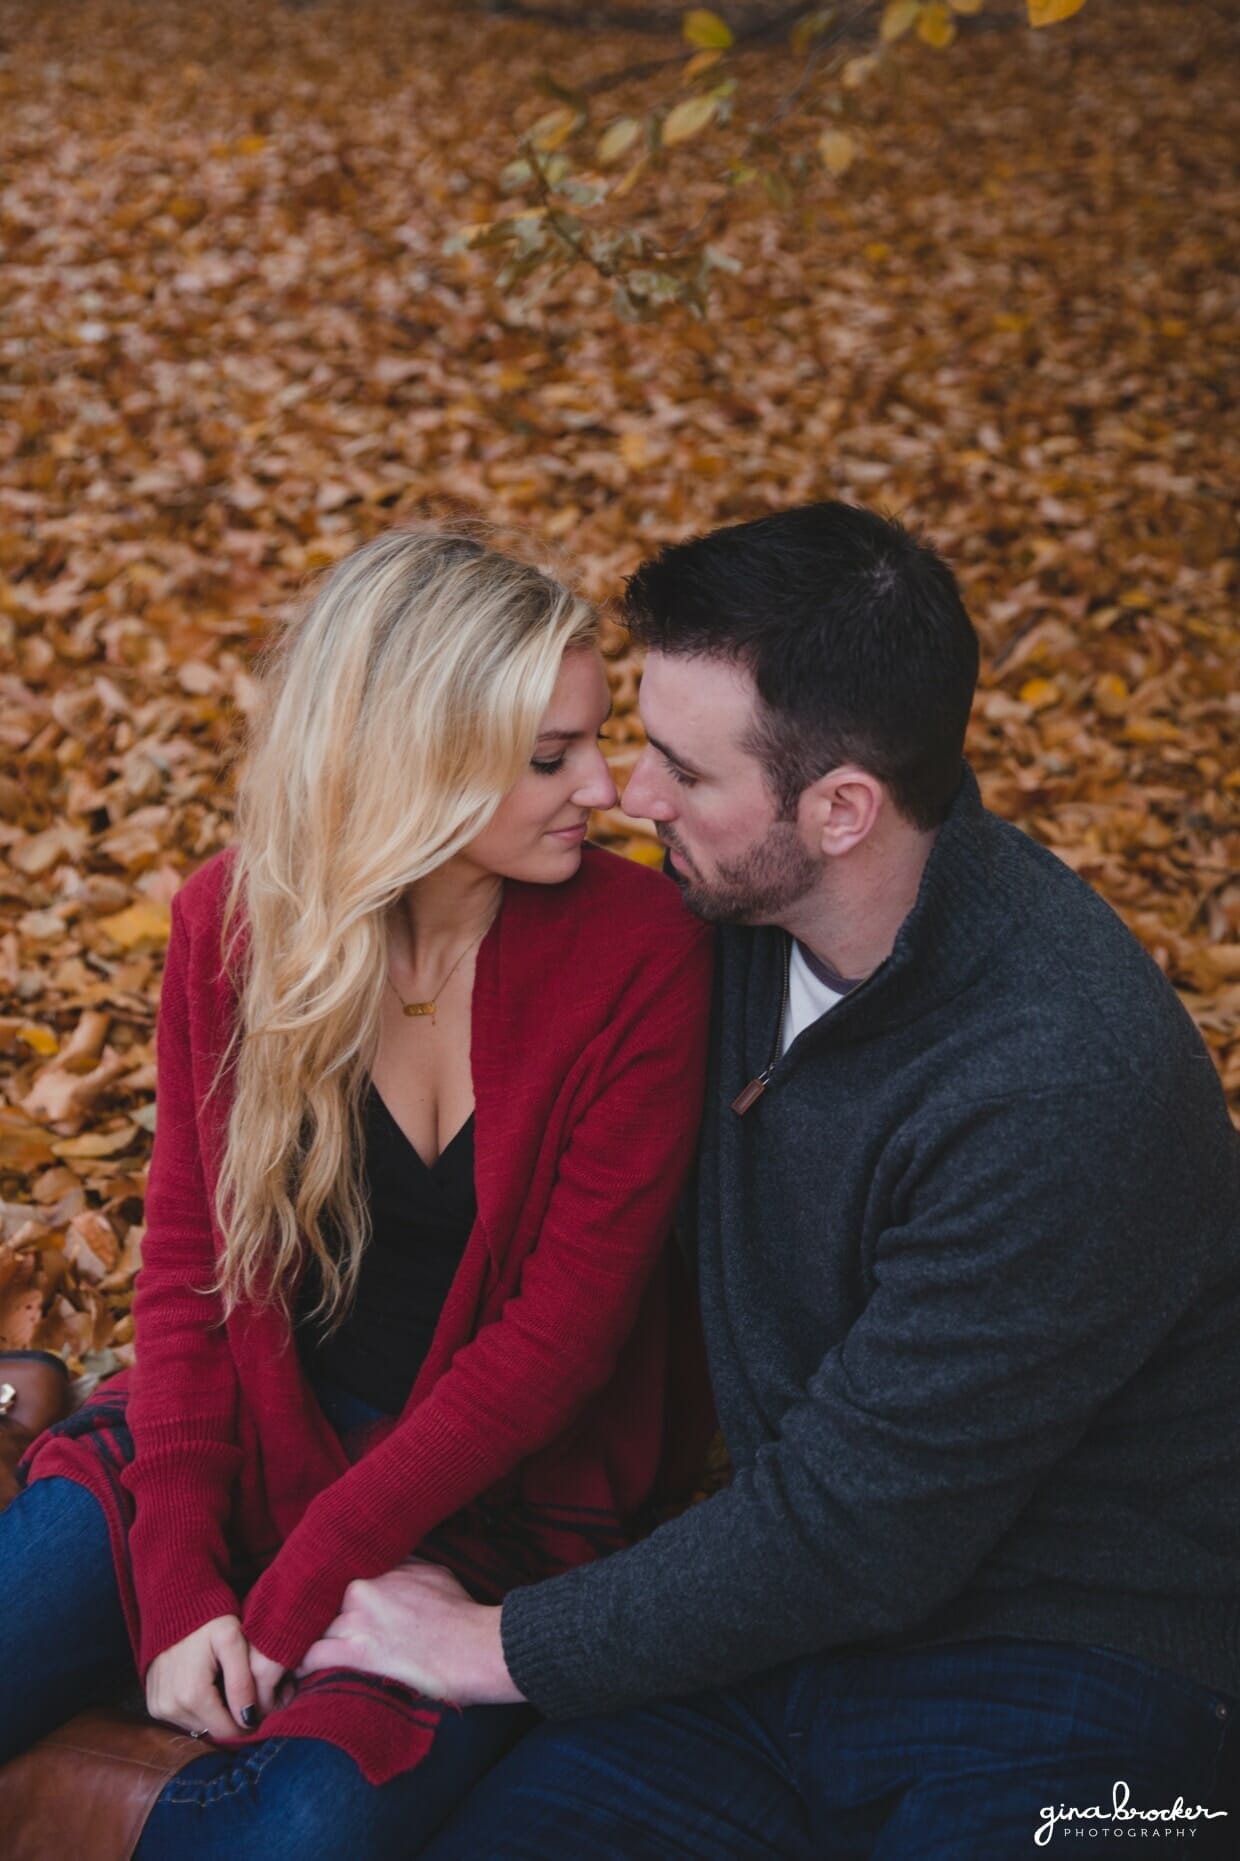 A couple sit together on a blanket during their fall couple session at the Arnold Arboretum in Boston, Massachusetts